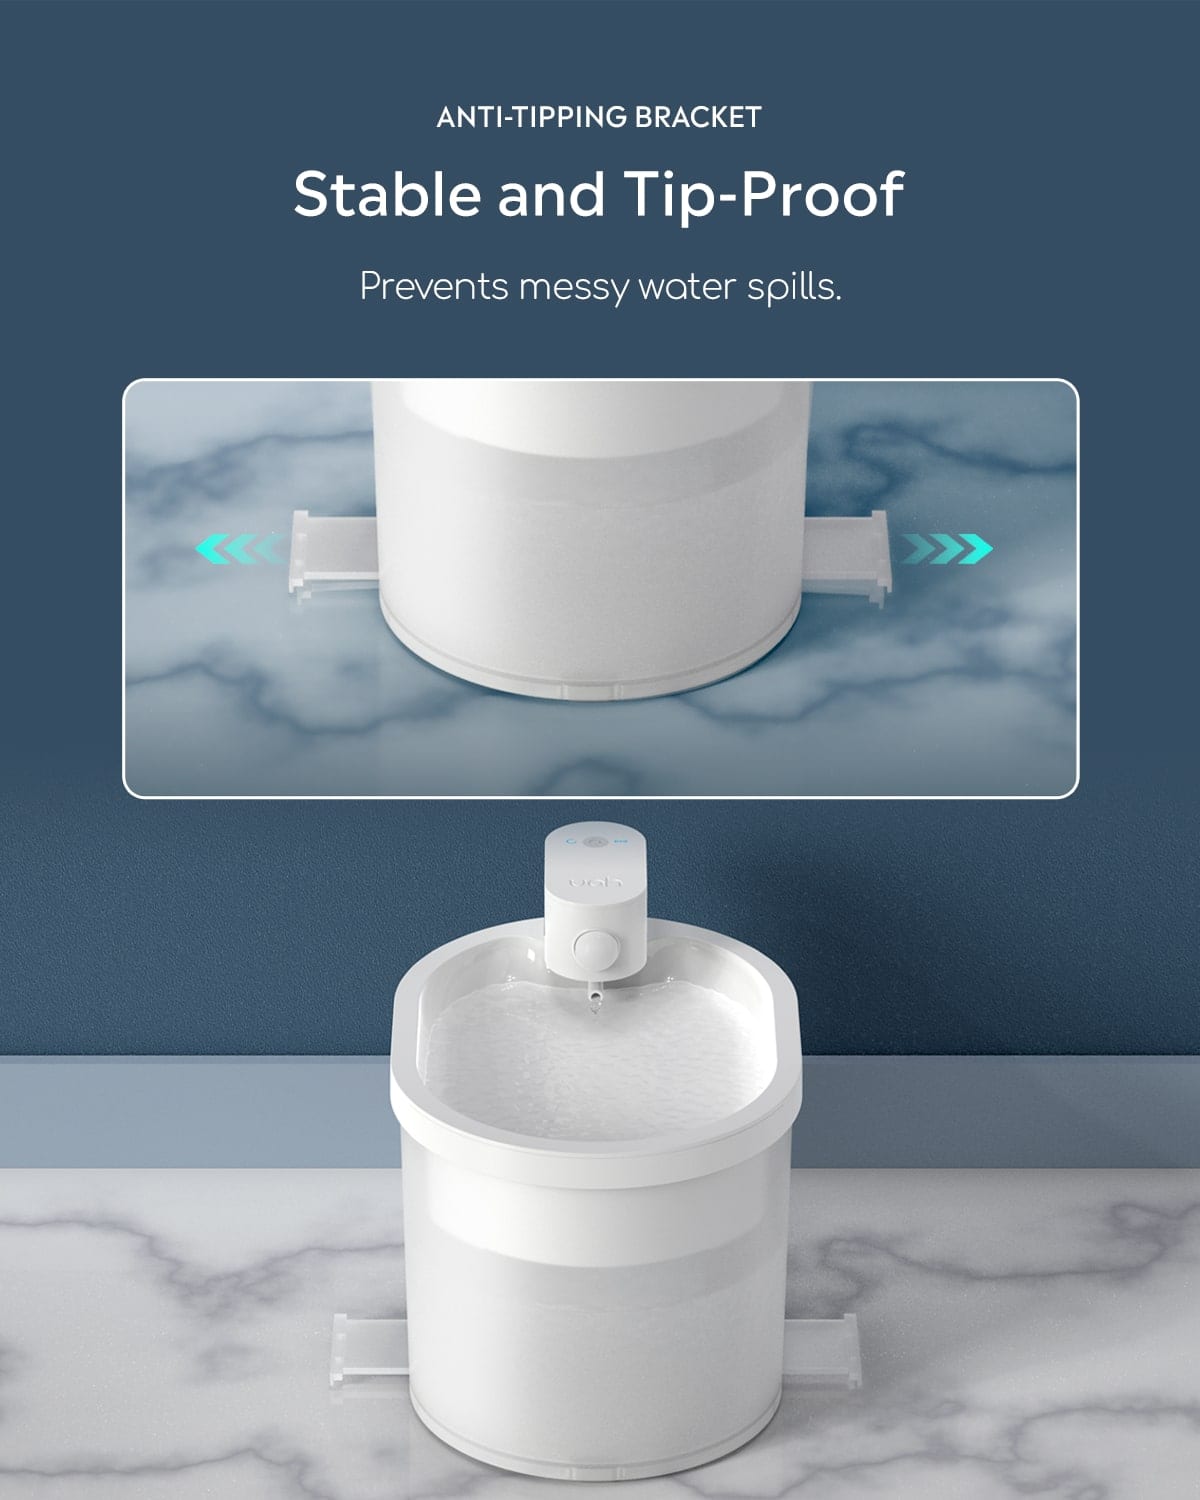 YSJ, 6PCS YSJ, Both sides of the ZERO wireless cat water fountain have a bracket to avoid tipping